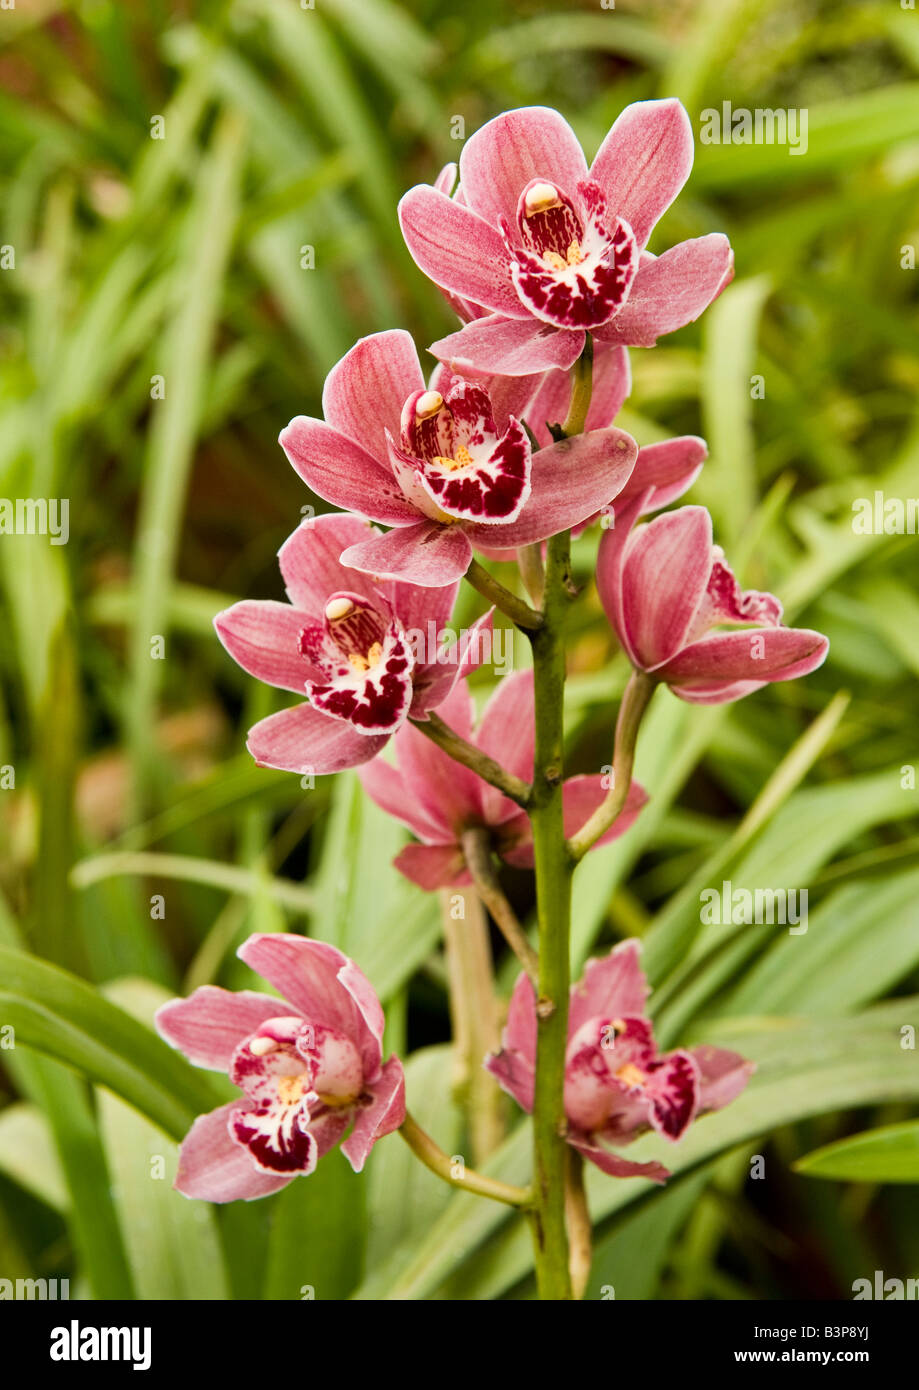 Blossoming Golden Rod orchid with long leaves revealing its showy pink flowers in striking contrast of yellow and maroon petals. Stock Photo